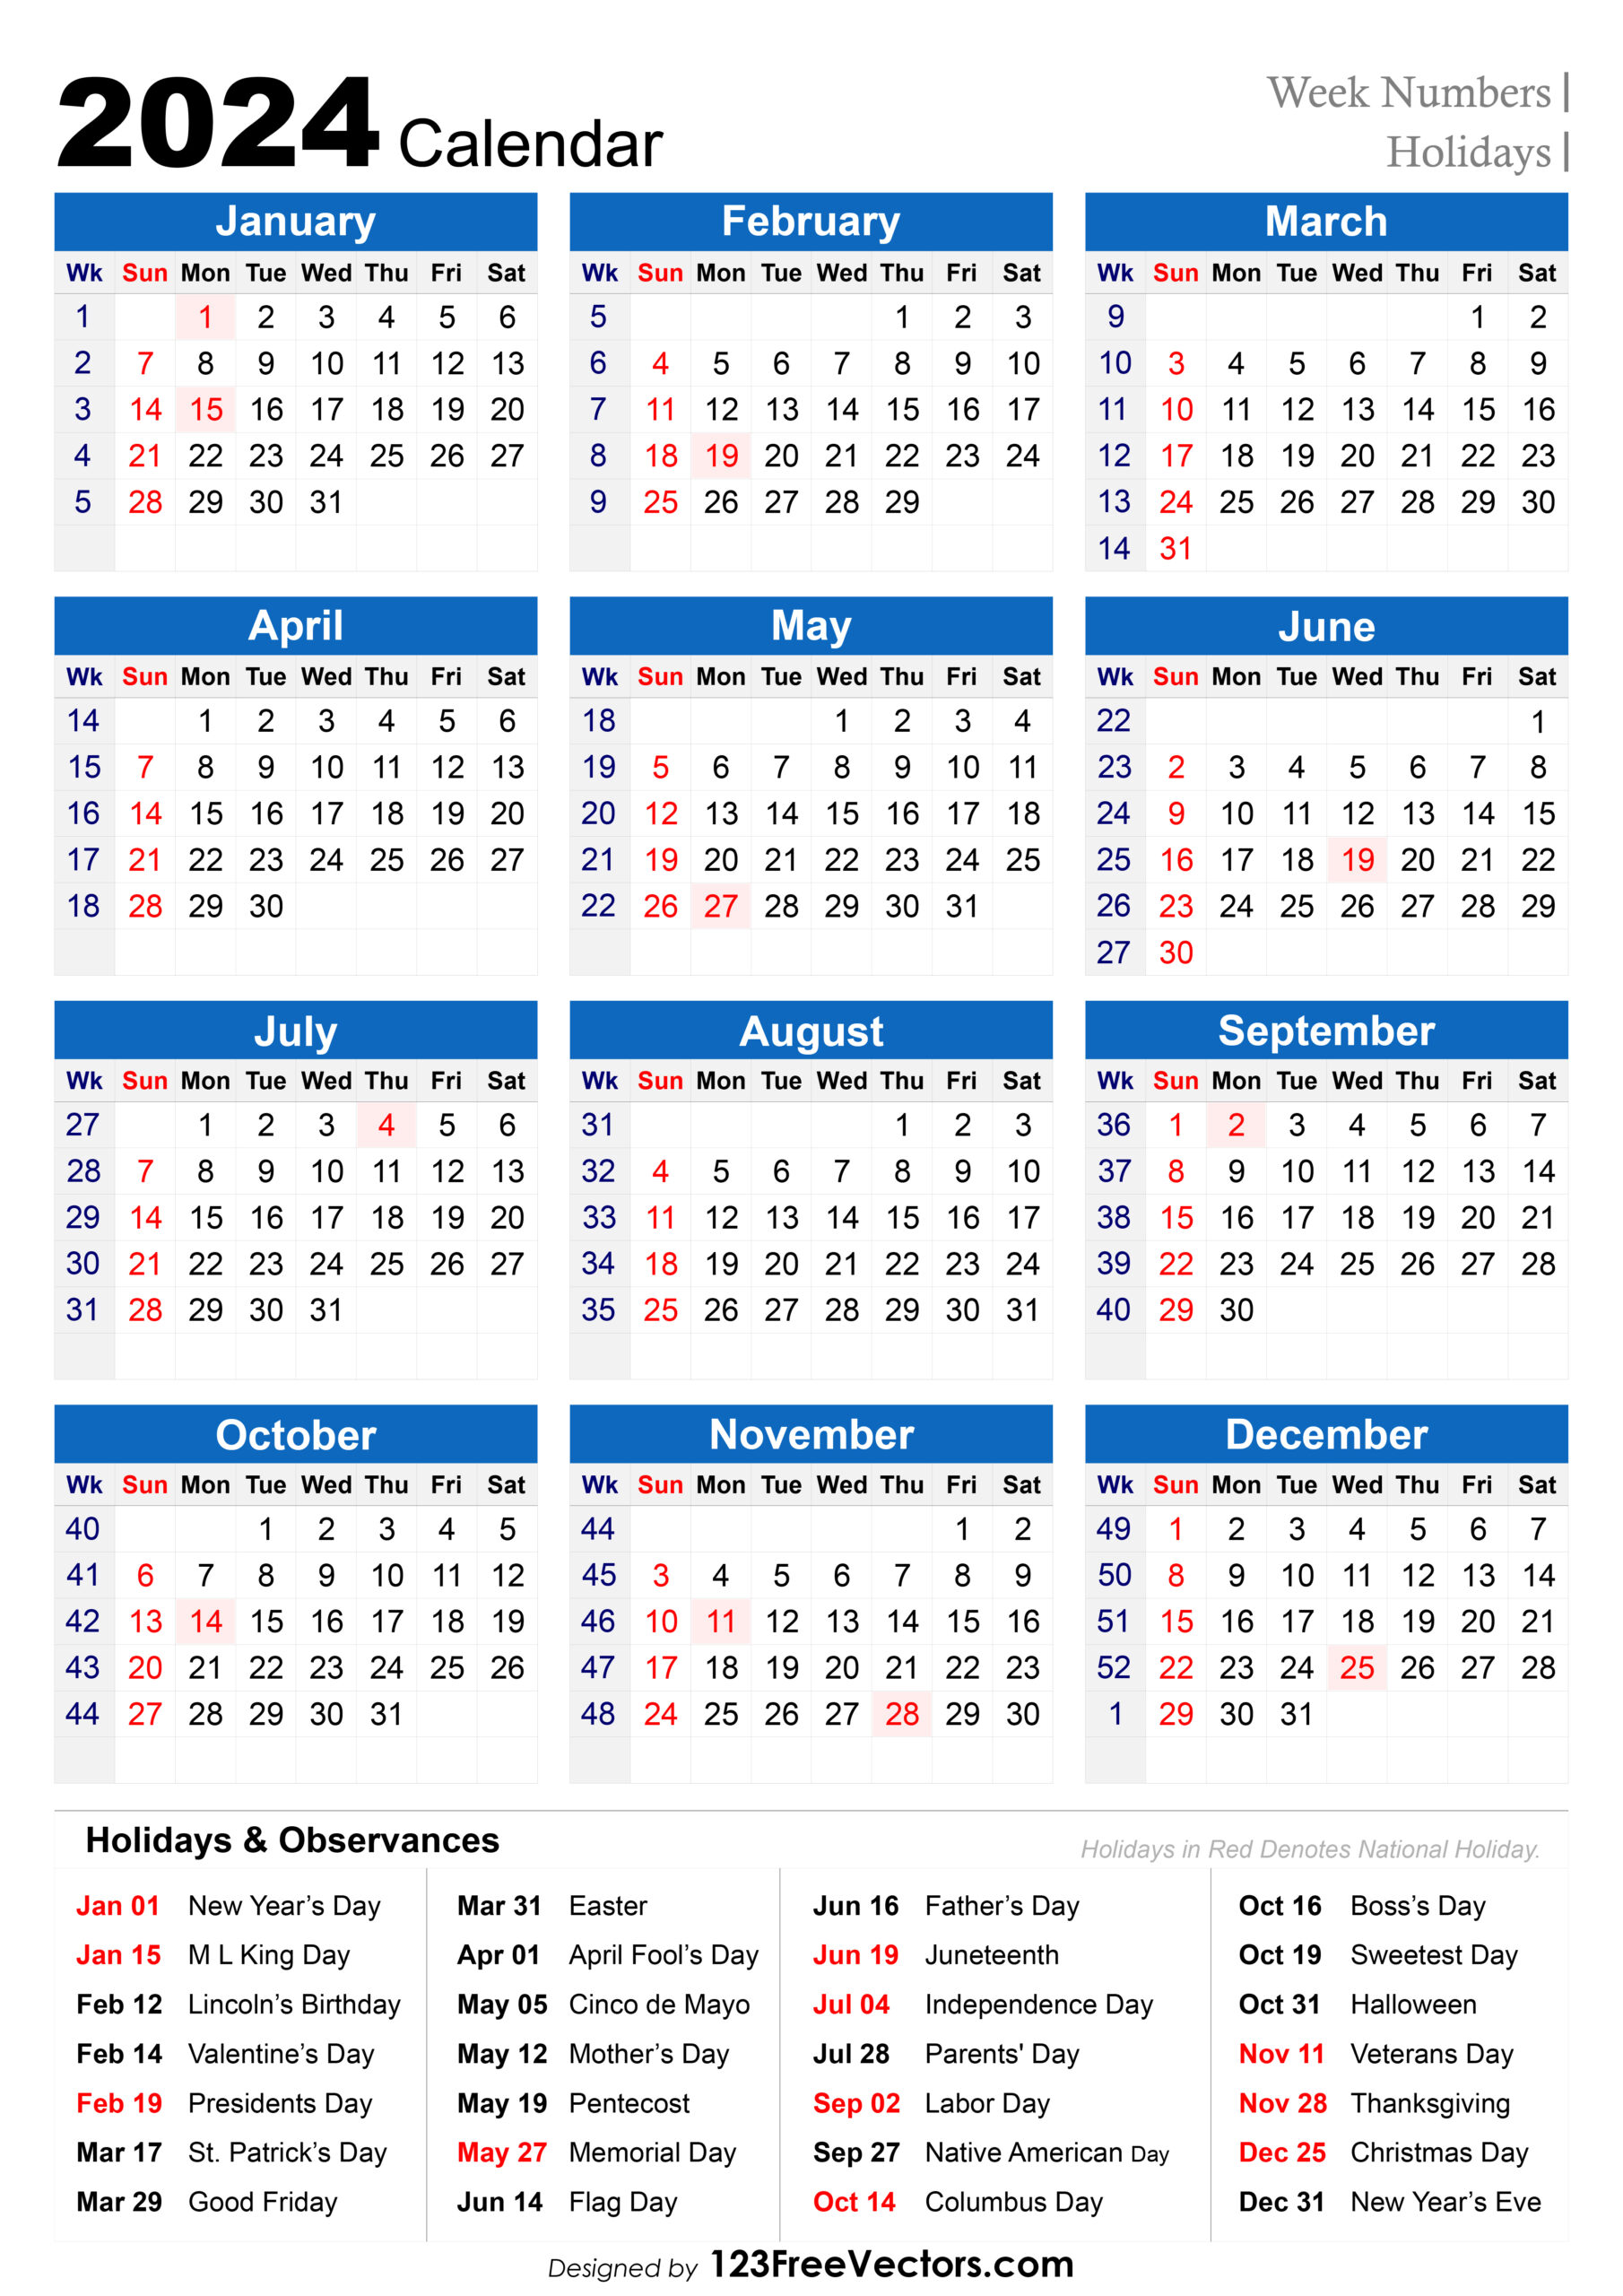 Free 2024 Holiday Calendar With Week Numbers | Printable Calendar 2024 Week Numbers